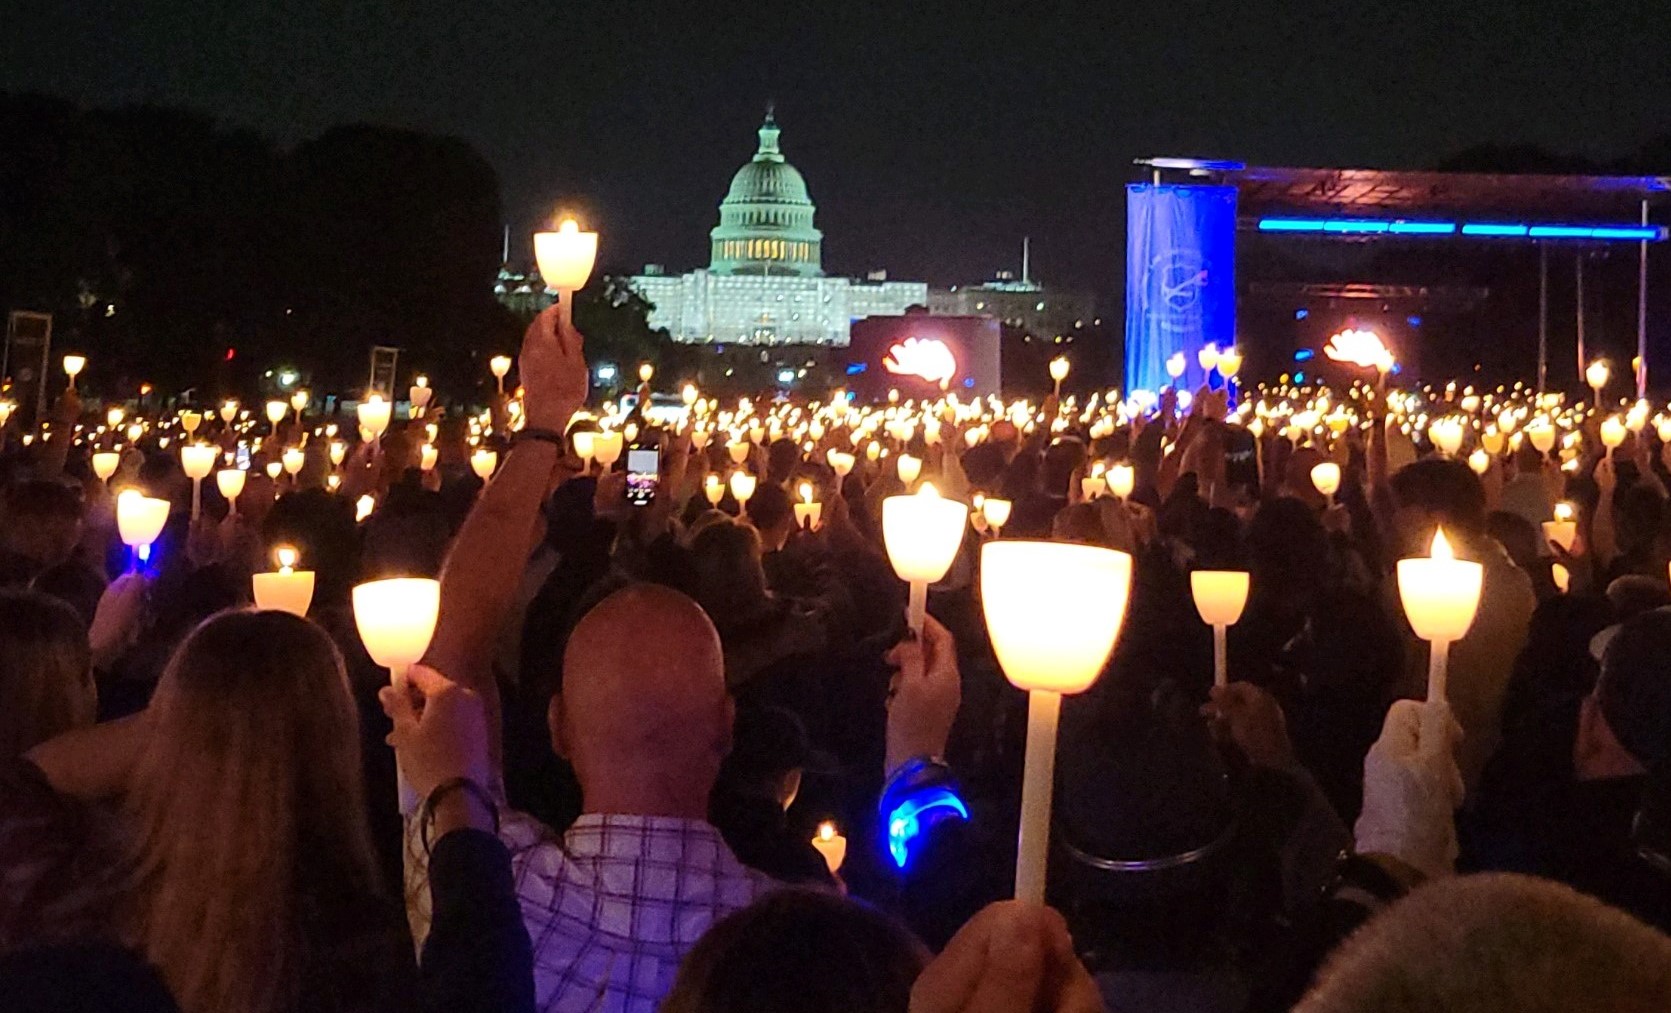 People hold candles in front of the capitol building in Washington D.C.